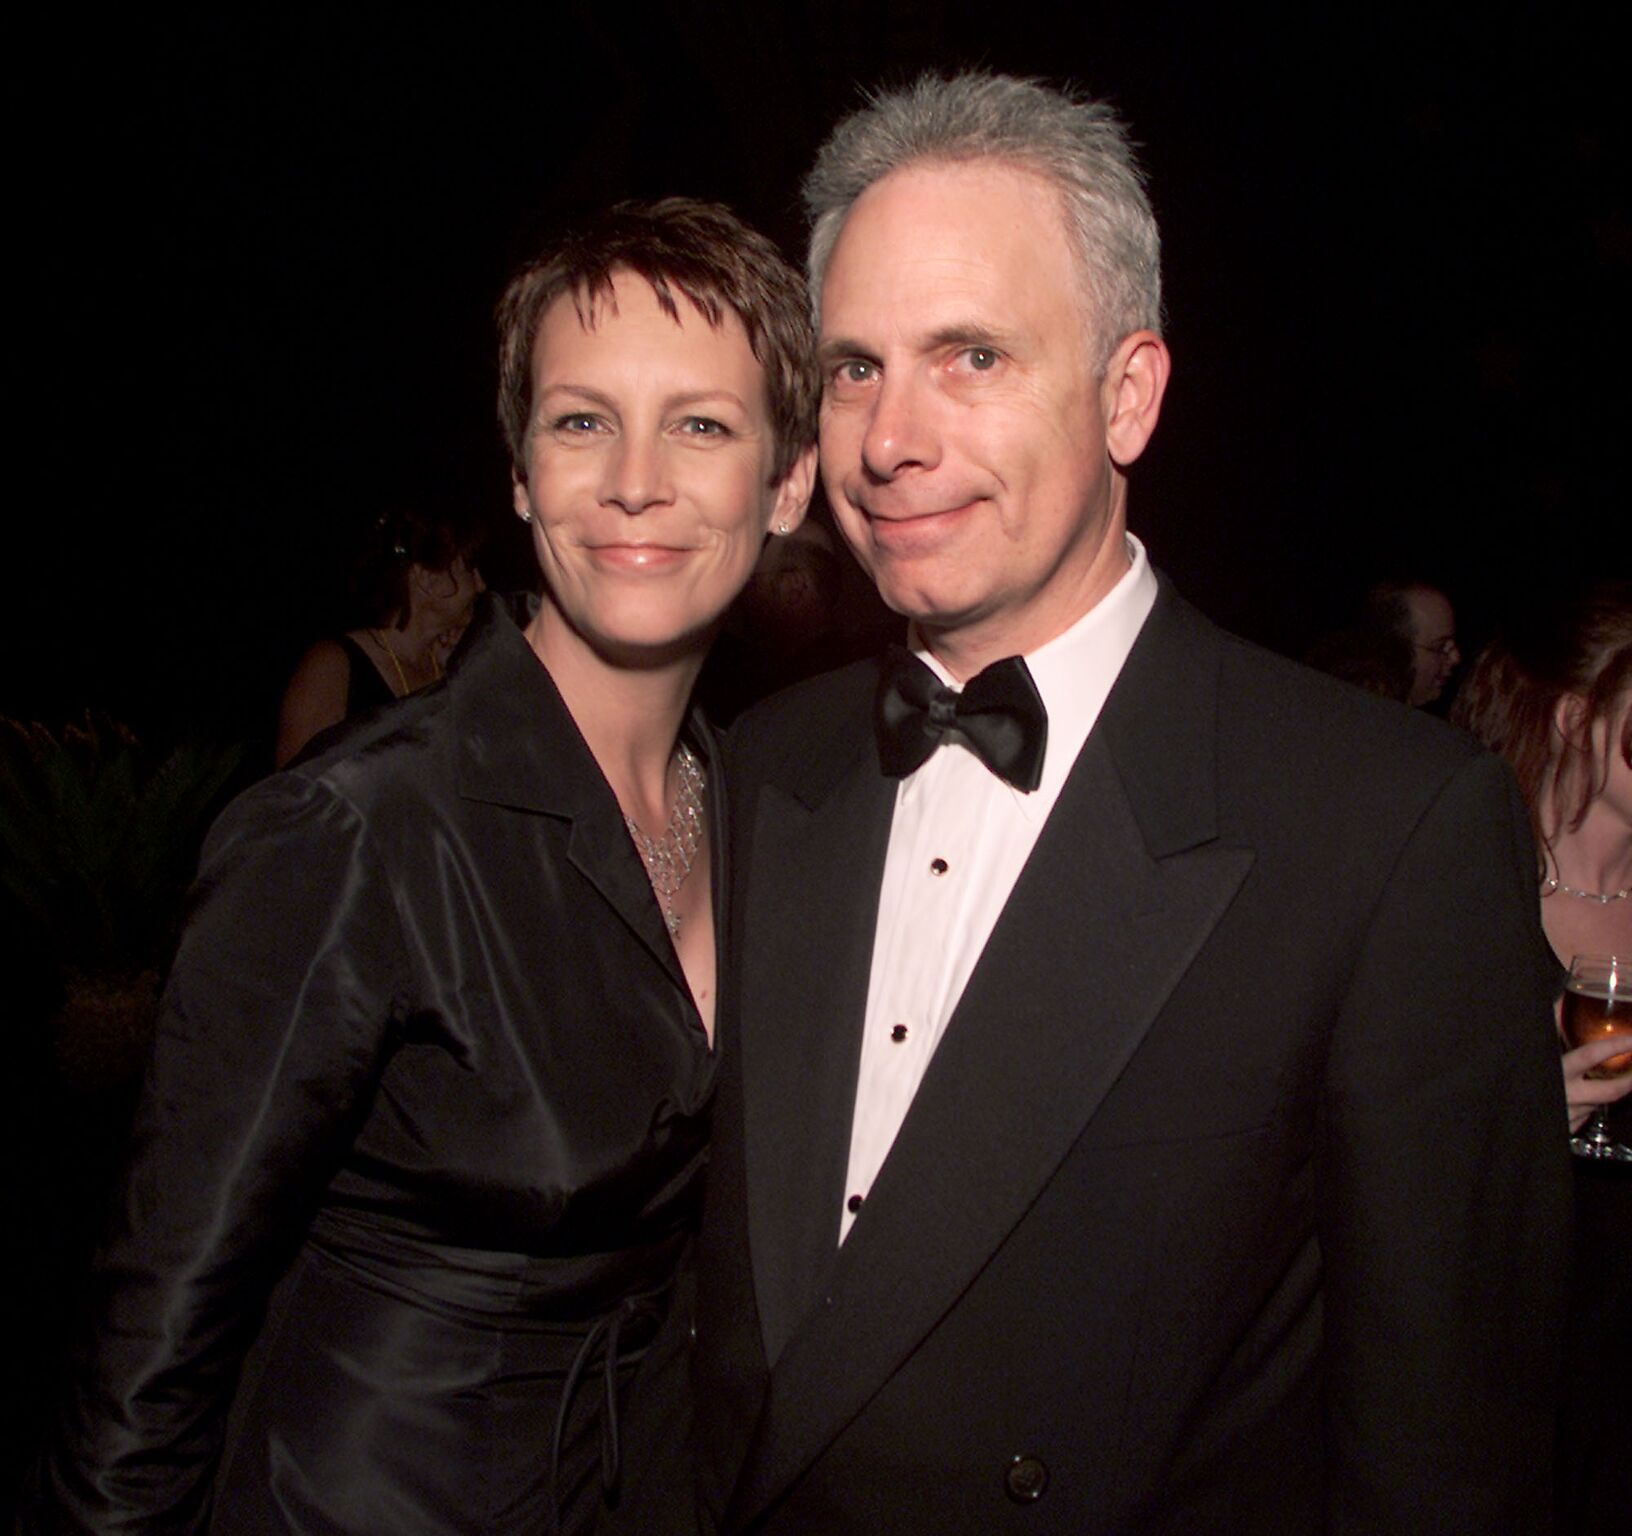 Jamie Lee Curtis and husband Christopher Guest at Comedy Central's post-party after the 15th Annual American Comedy Awards. | Source: Getty Images